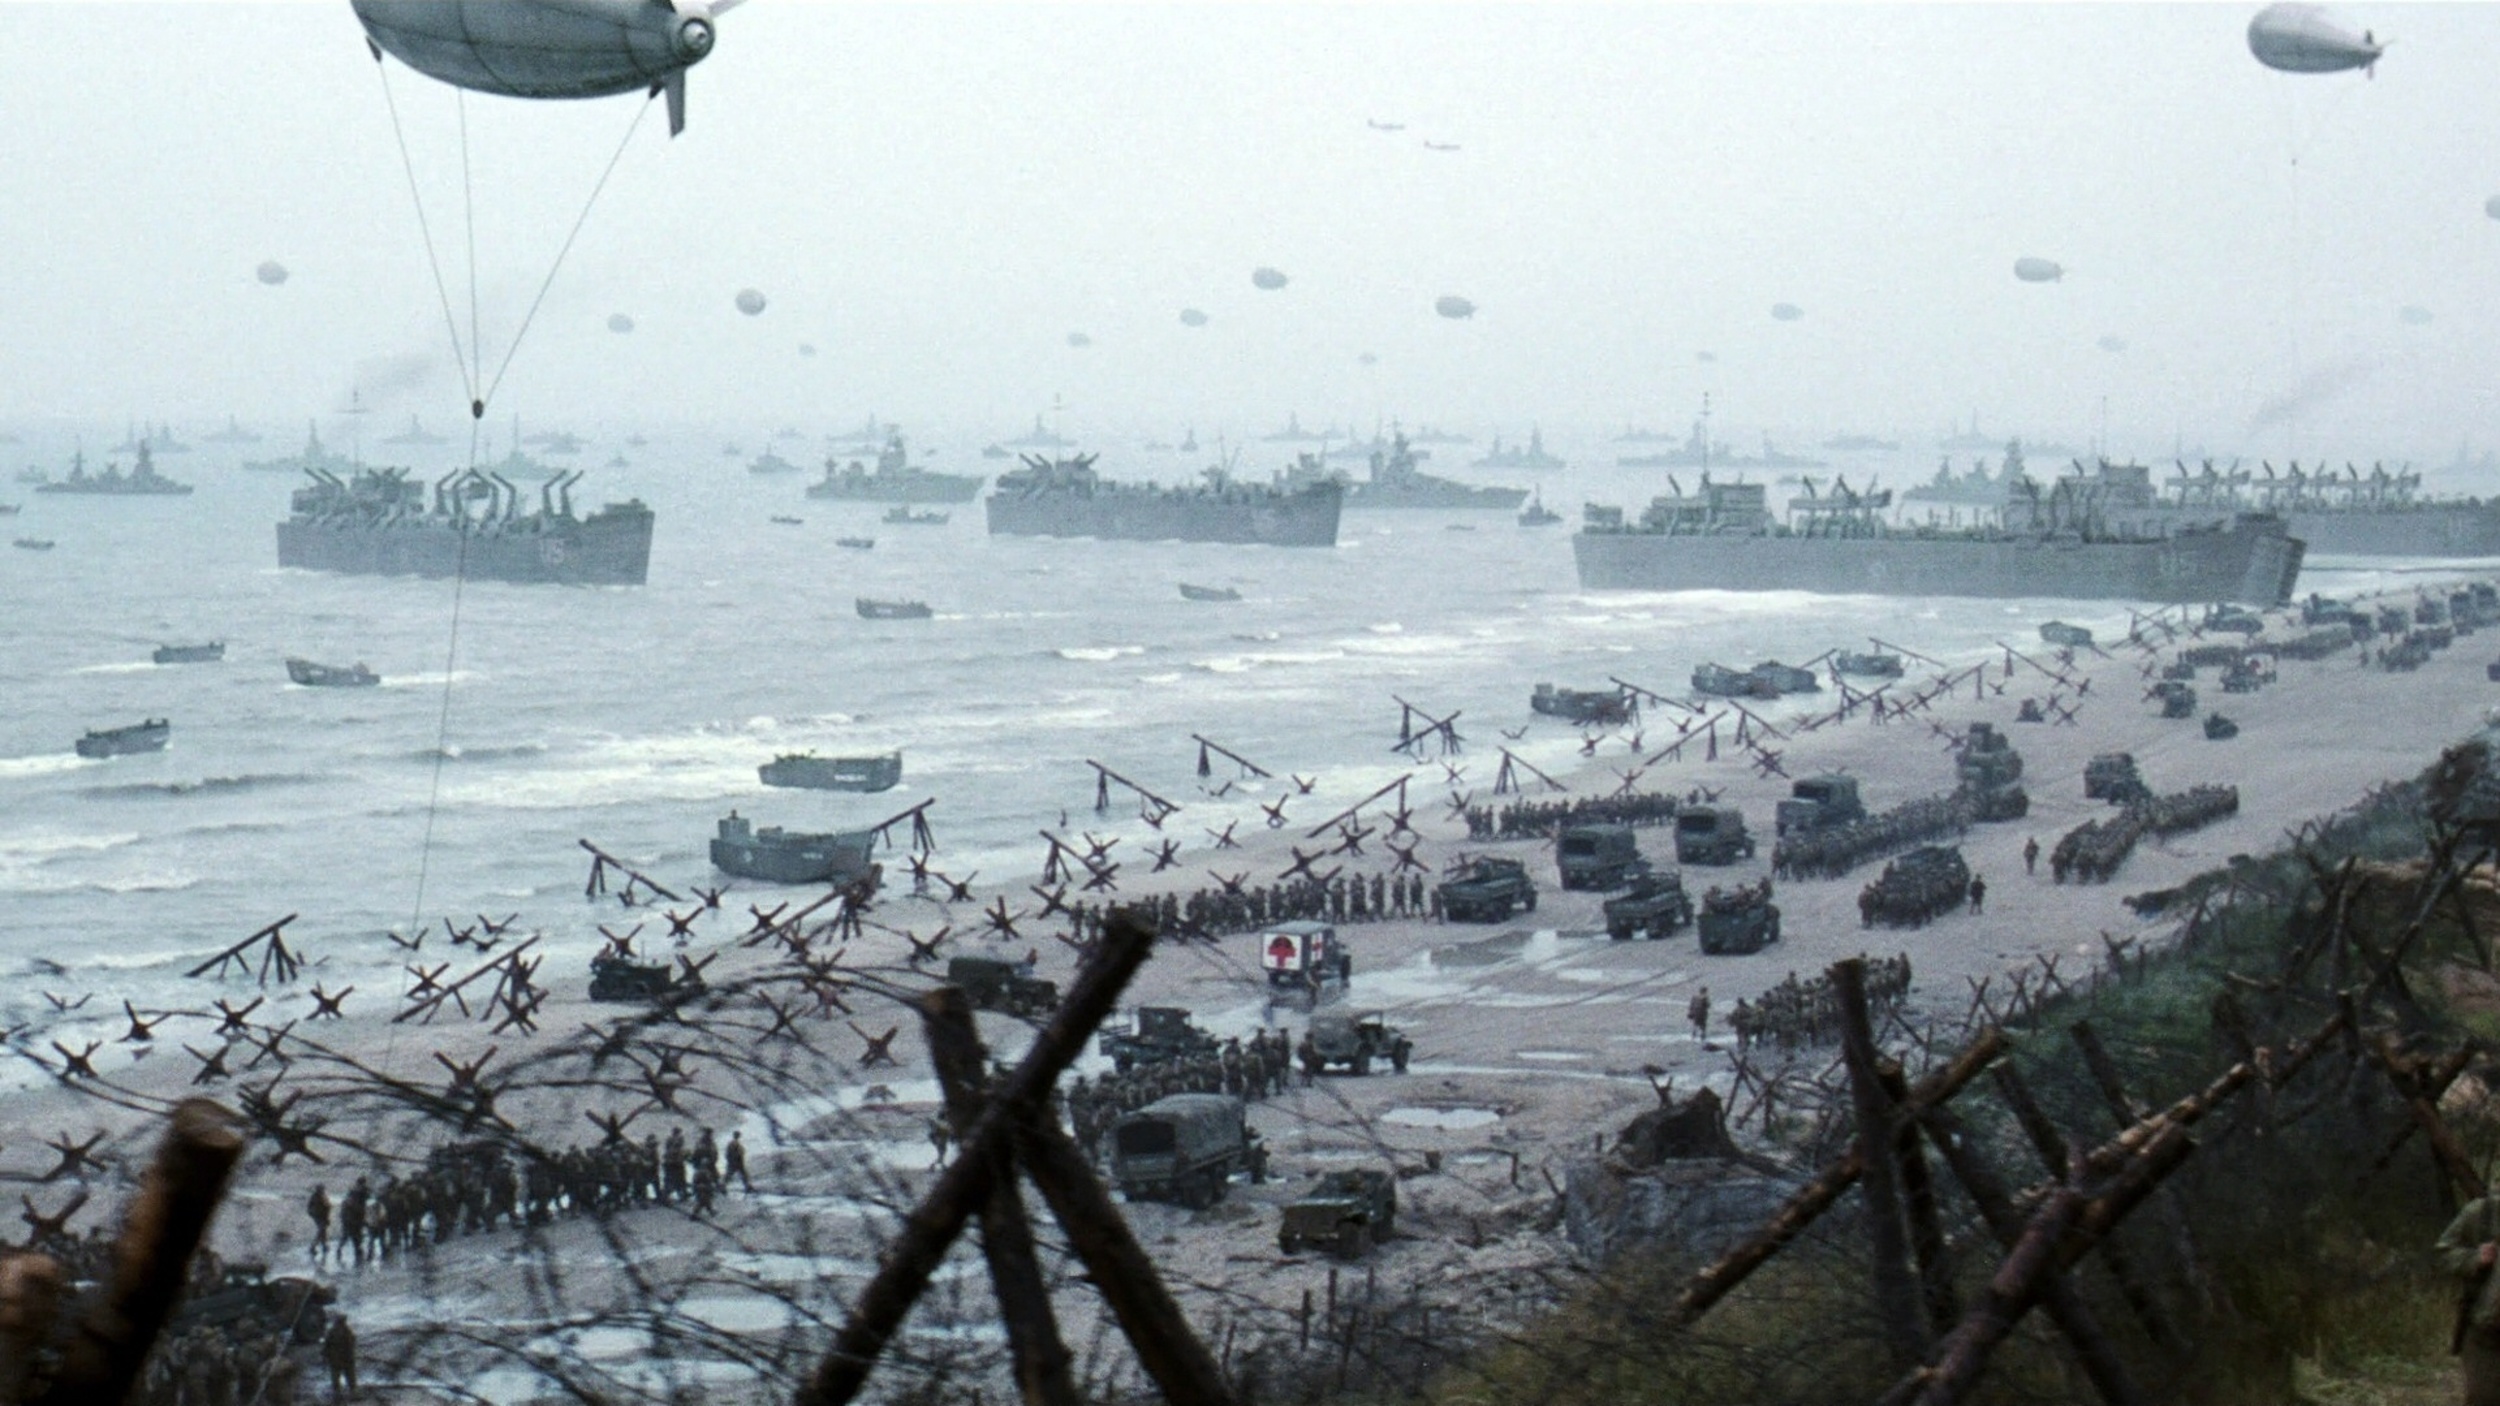 <p>The showpiece of <em>Saving Private Ryan</em> is the landing at Omaha Beach in Normandy for the D-Day scene. It’s the movie's second scene and lasts a full 20 minutes. Spielberg searched high and wide for a beach that could replicate Omaha and ended up at Ballinesker Beach in Ireland. This scene alone cost $12 million and used over 1,500 extras.</p><p>You may also like: <a href='https://www.yardbarker.com/entertainment/articles/the_20_best_sitcom_cold_opens/s1__38940912'>The 20 best sitcom cold opens</a></p>